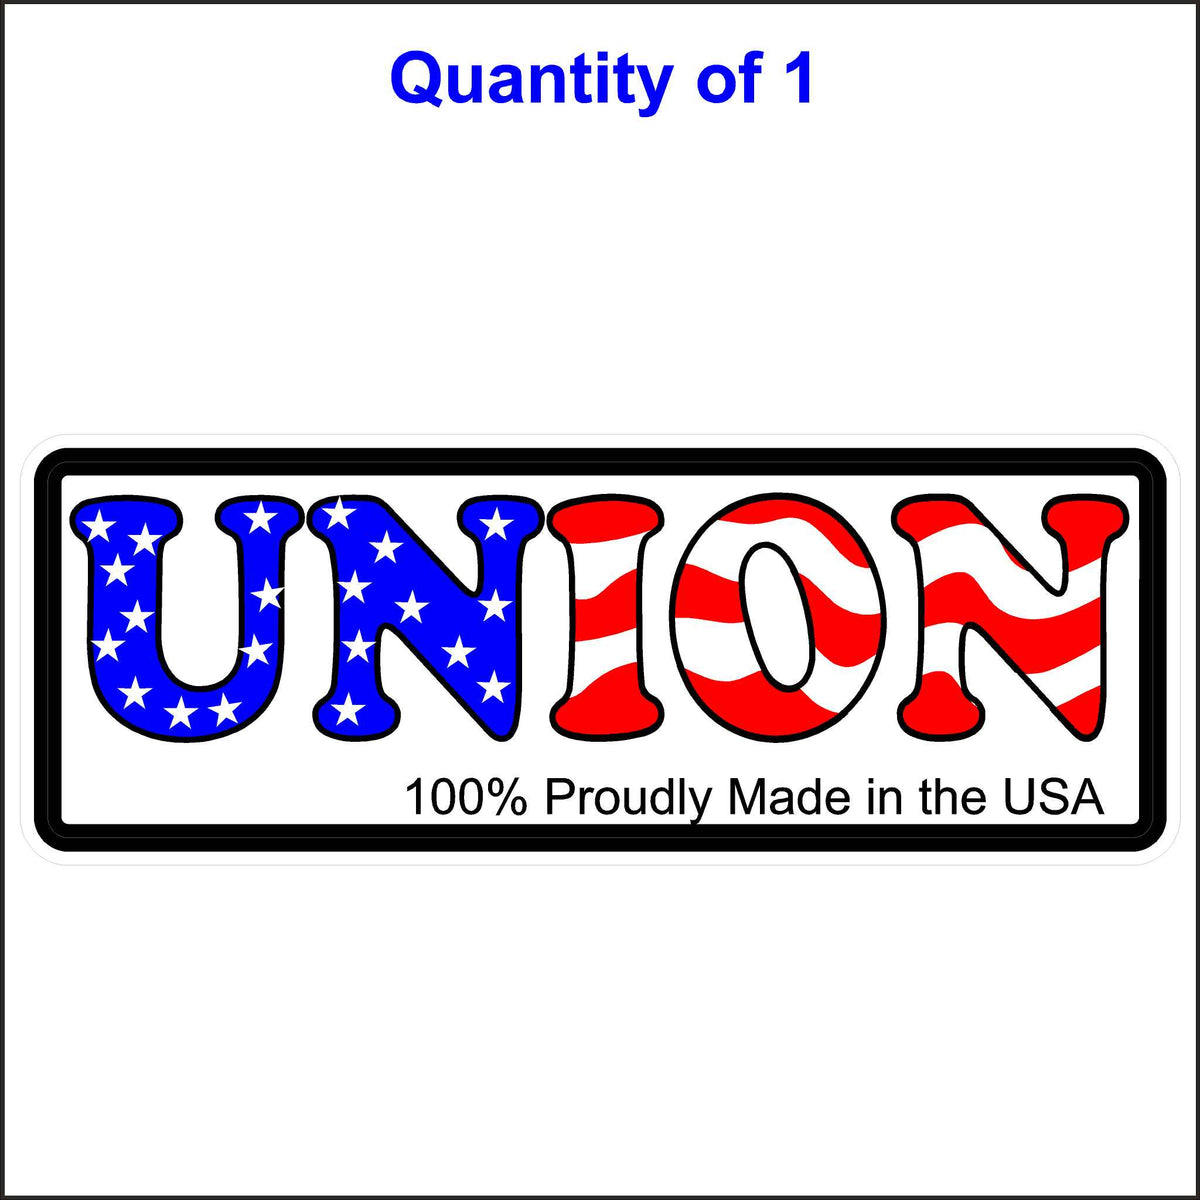 Union Proudly Made in the USA Sticker.